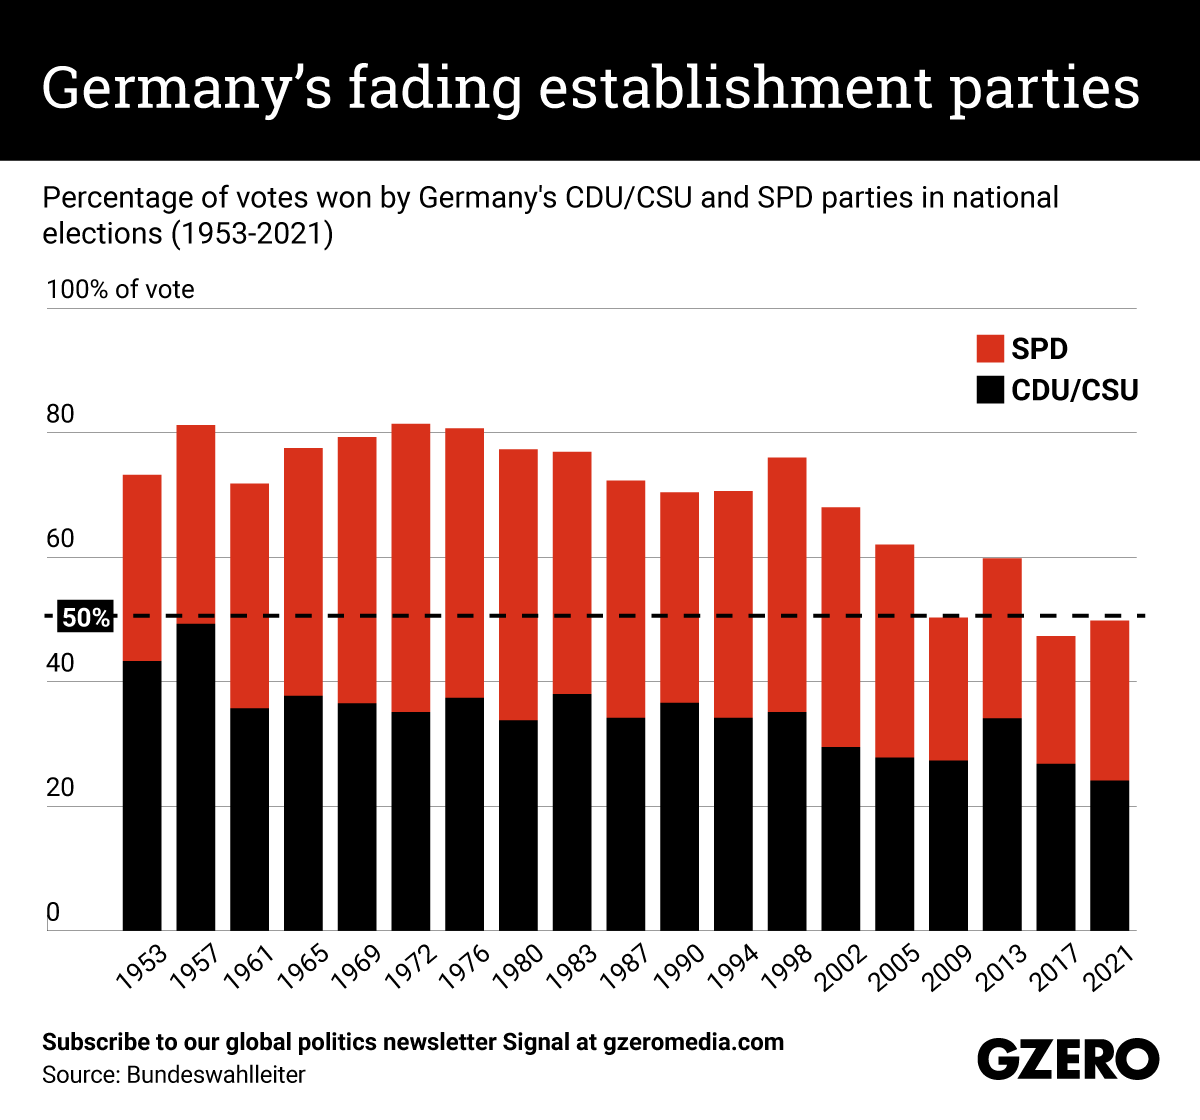 Percentage of votes won by Germany's CDU/CSU and SPD parties in national elections (1953-2021)